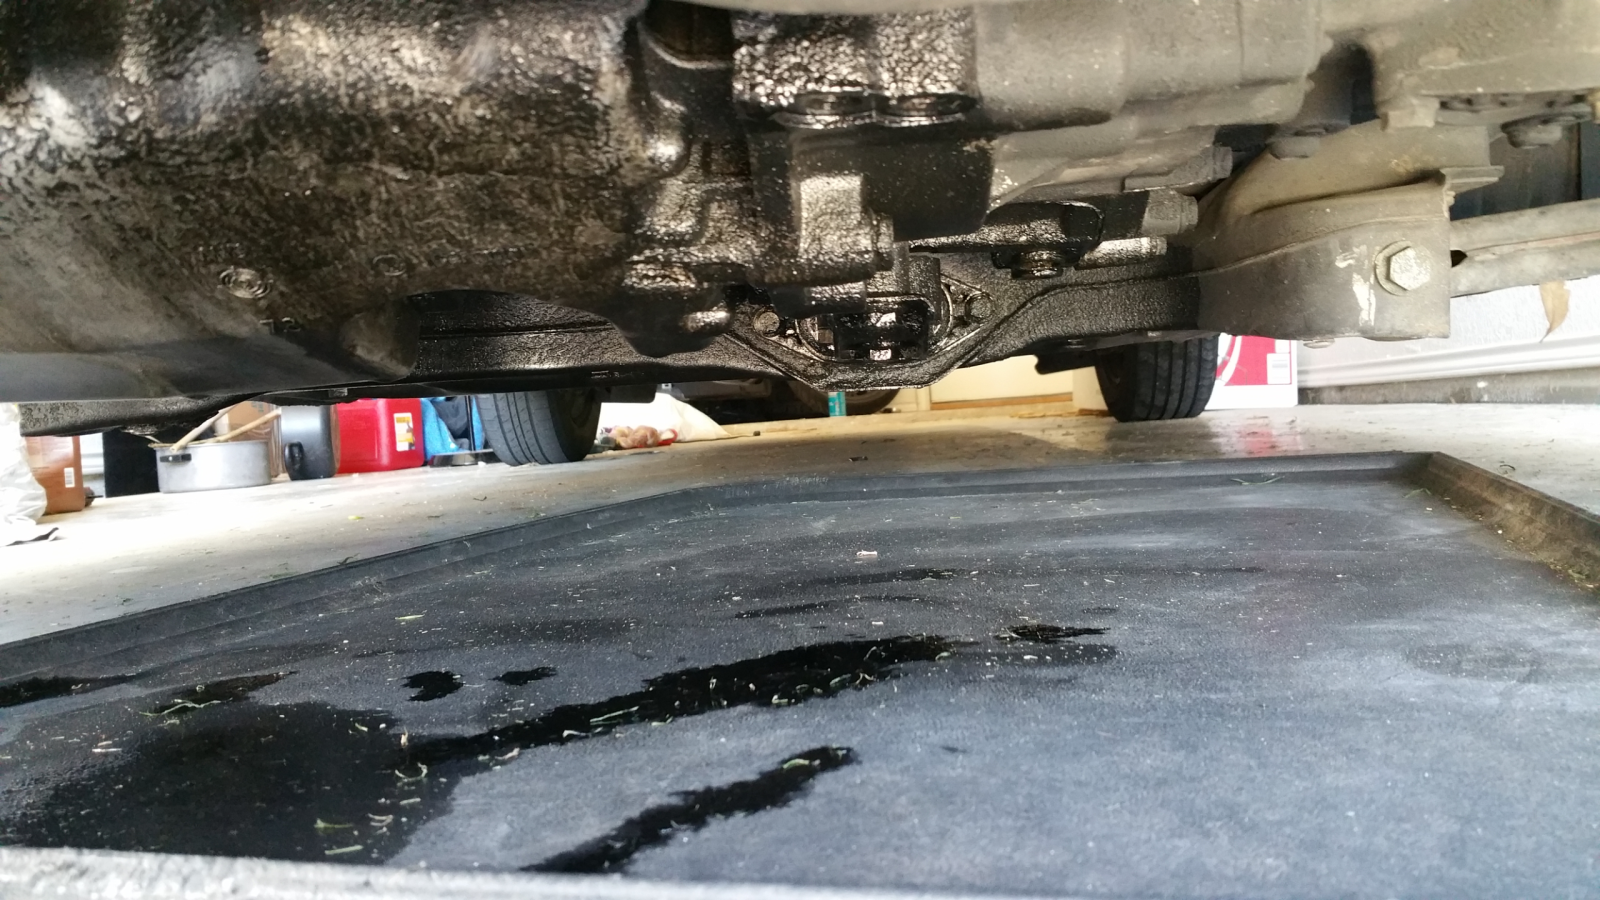 Range Rover oil leak near drivers front: how to fix